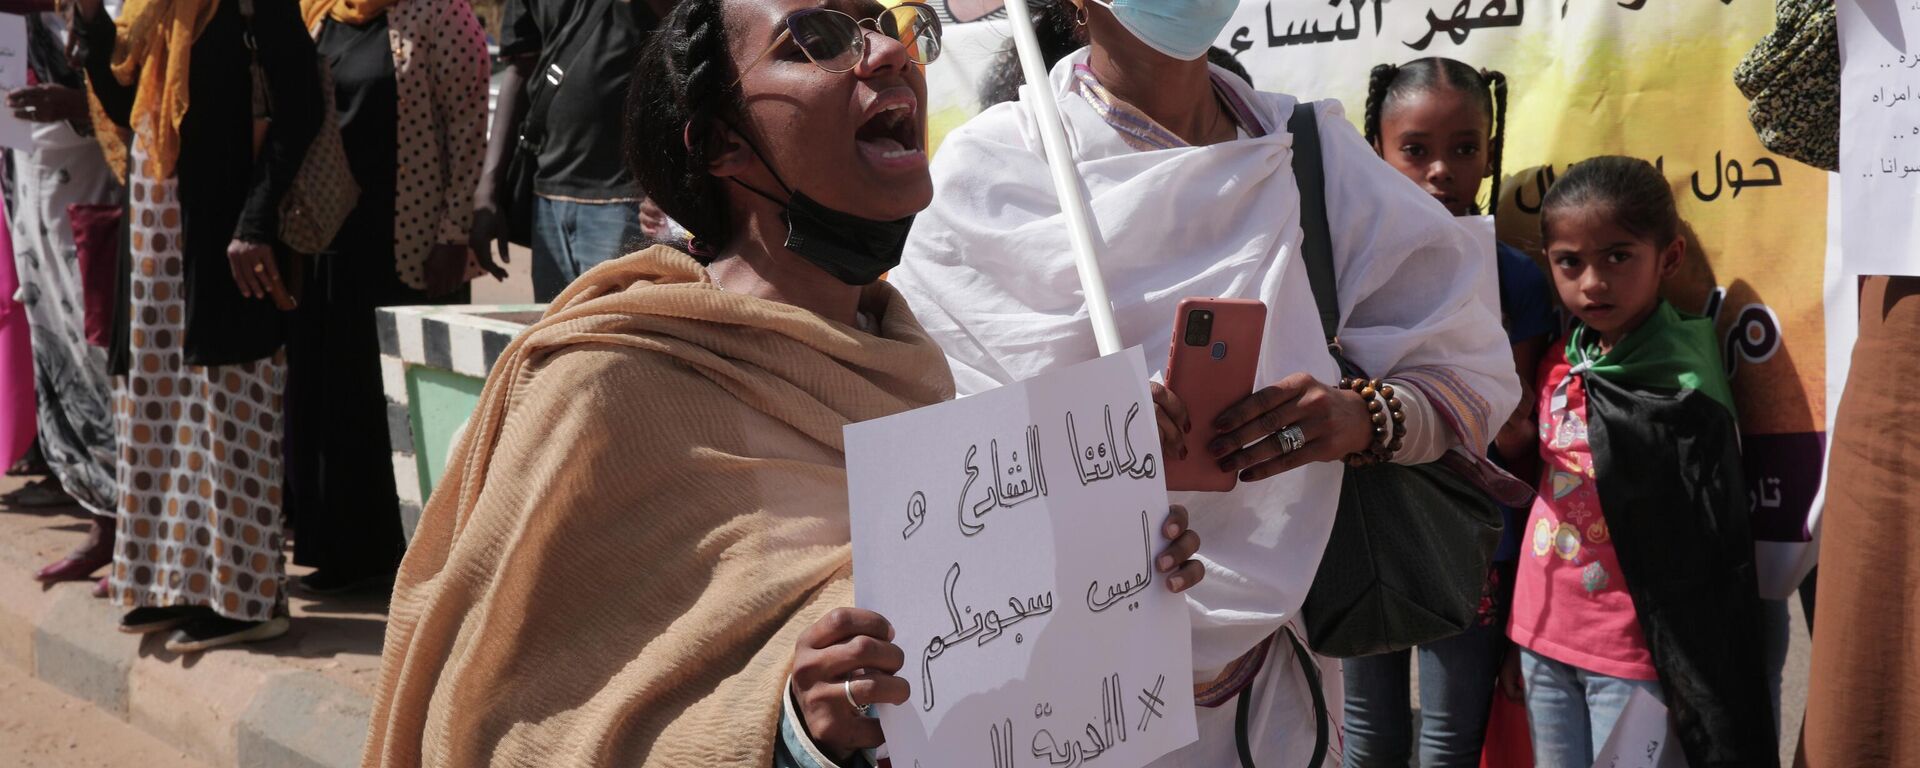 Women chant slogans protesting violence against women and demanding the release of all detainees before the U.N. rights office in Khartoum - Sputnik Africa, 1920, 18.08.2023